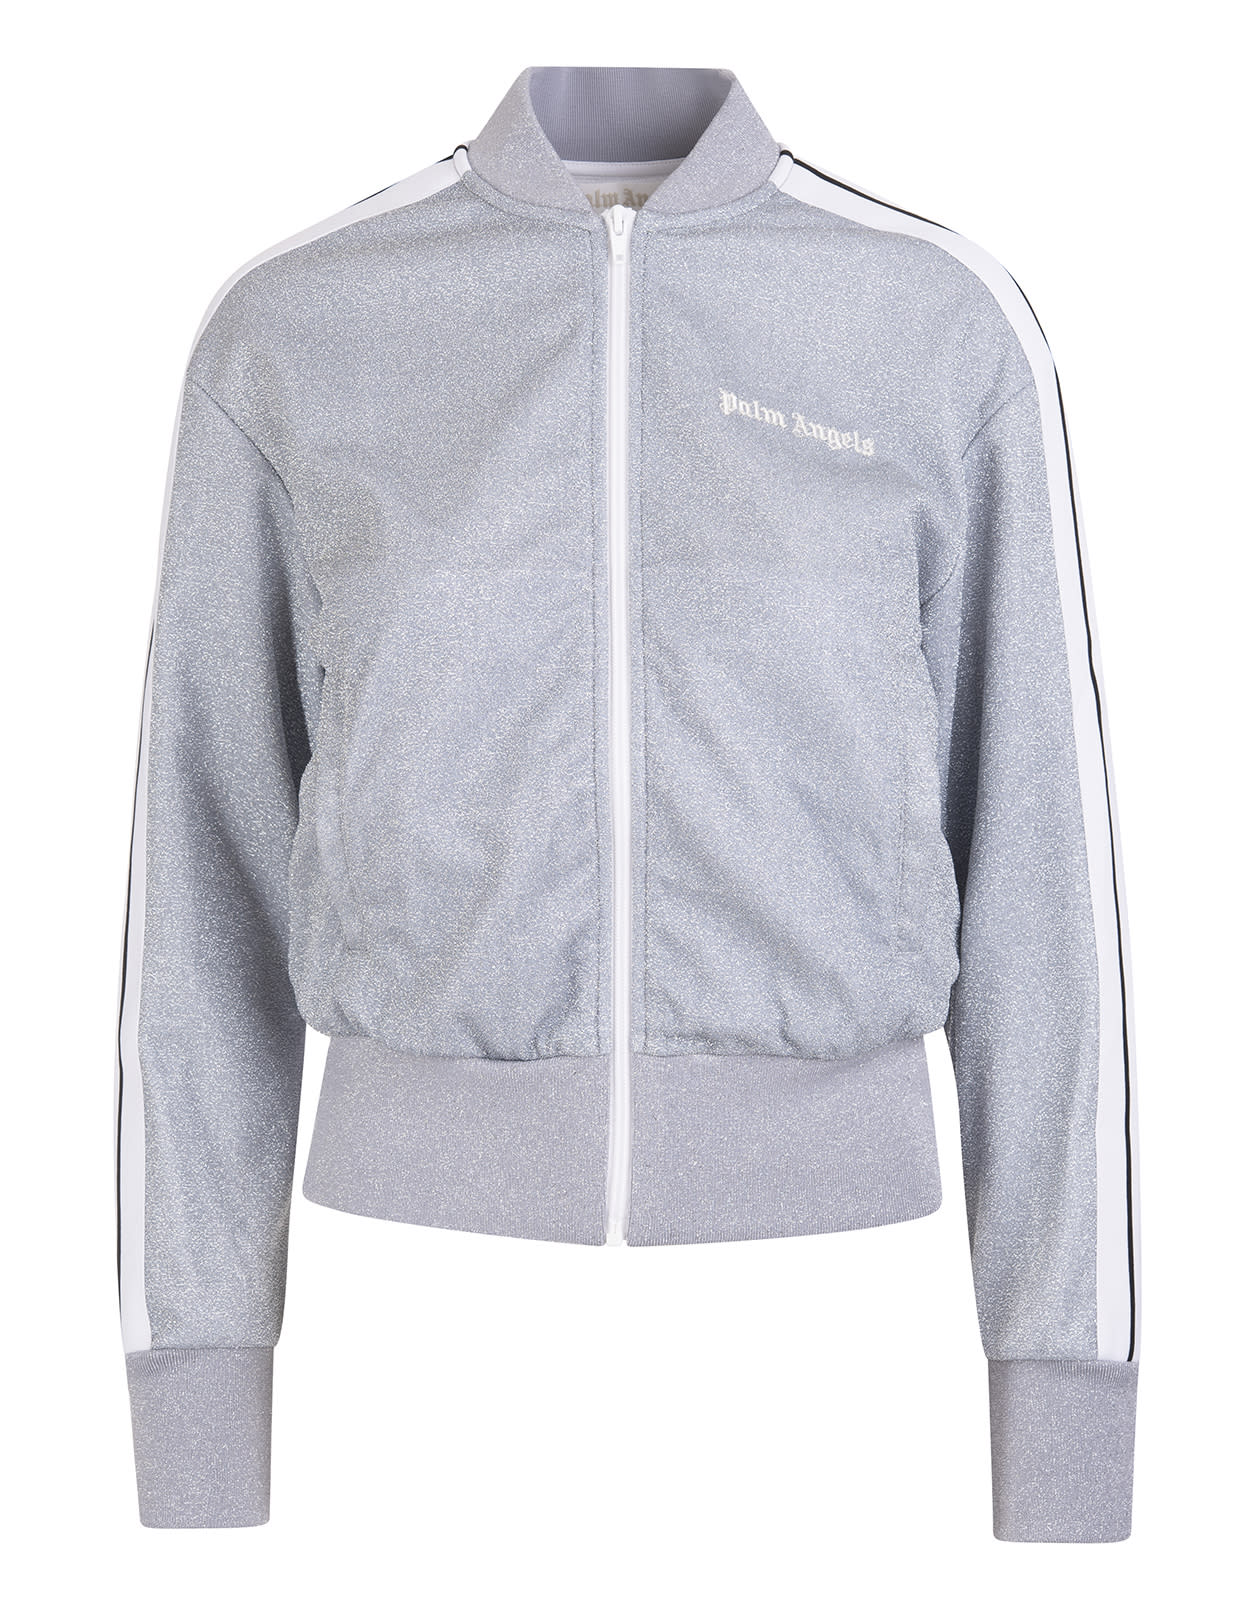 Palm Angels Woman Light Grey Glitter Sweatshirt With Zip And Contrast Bands